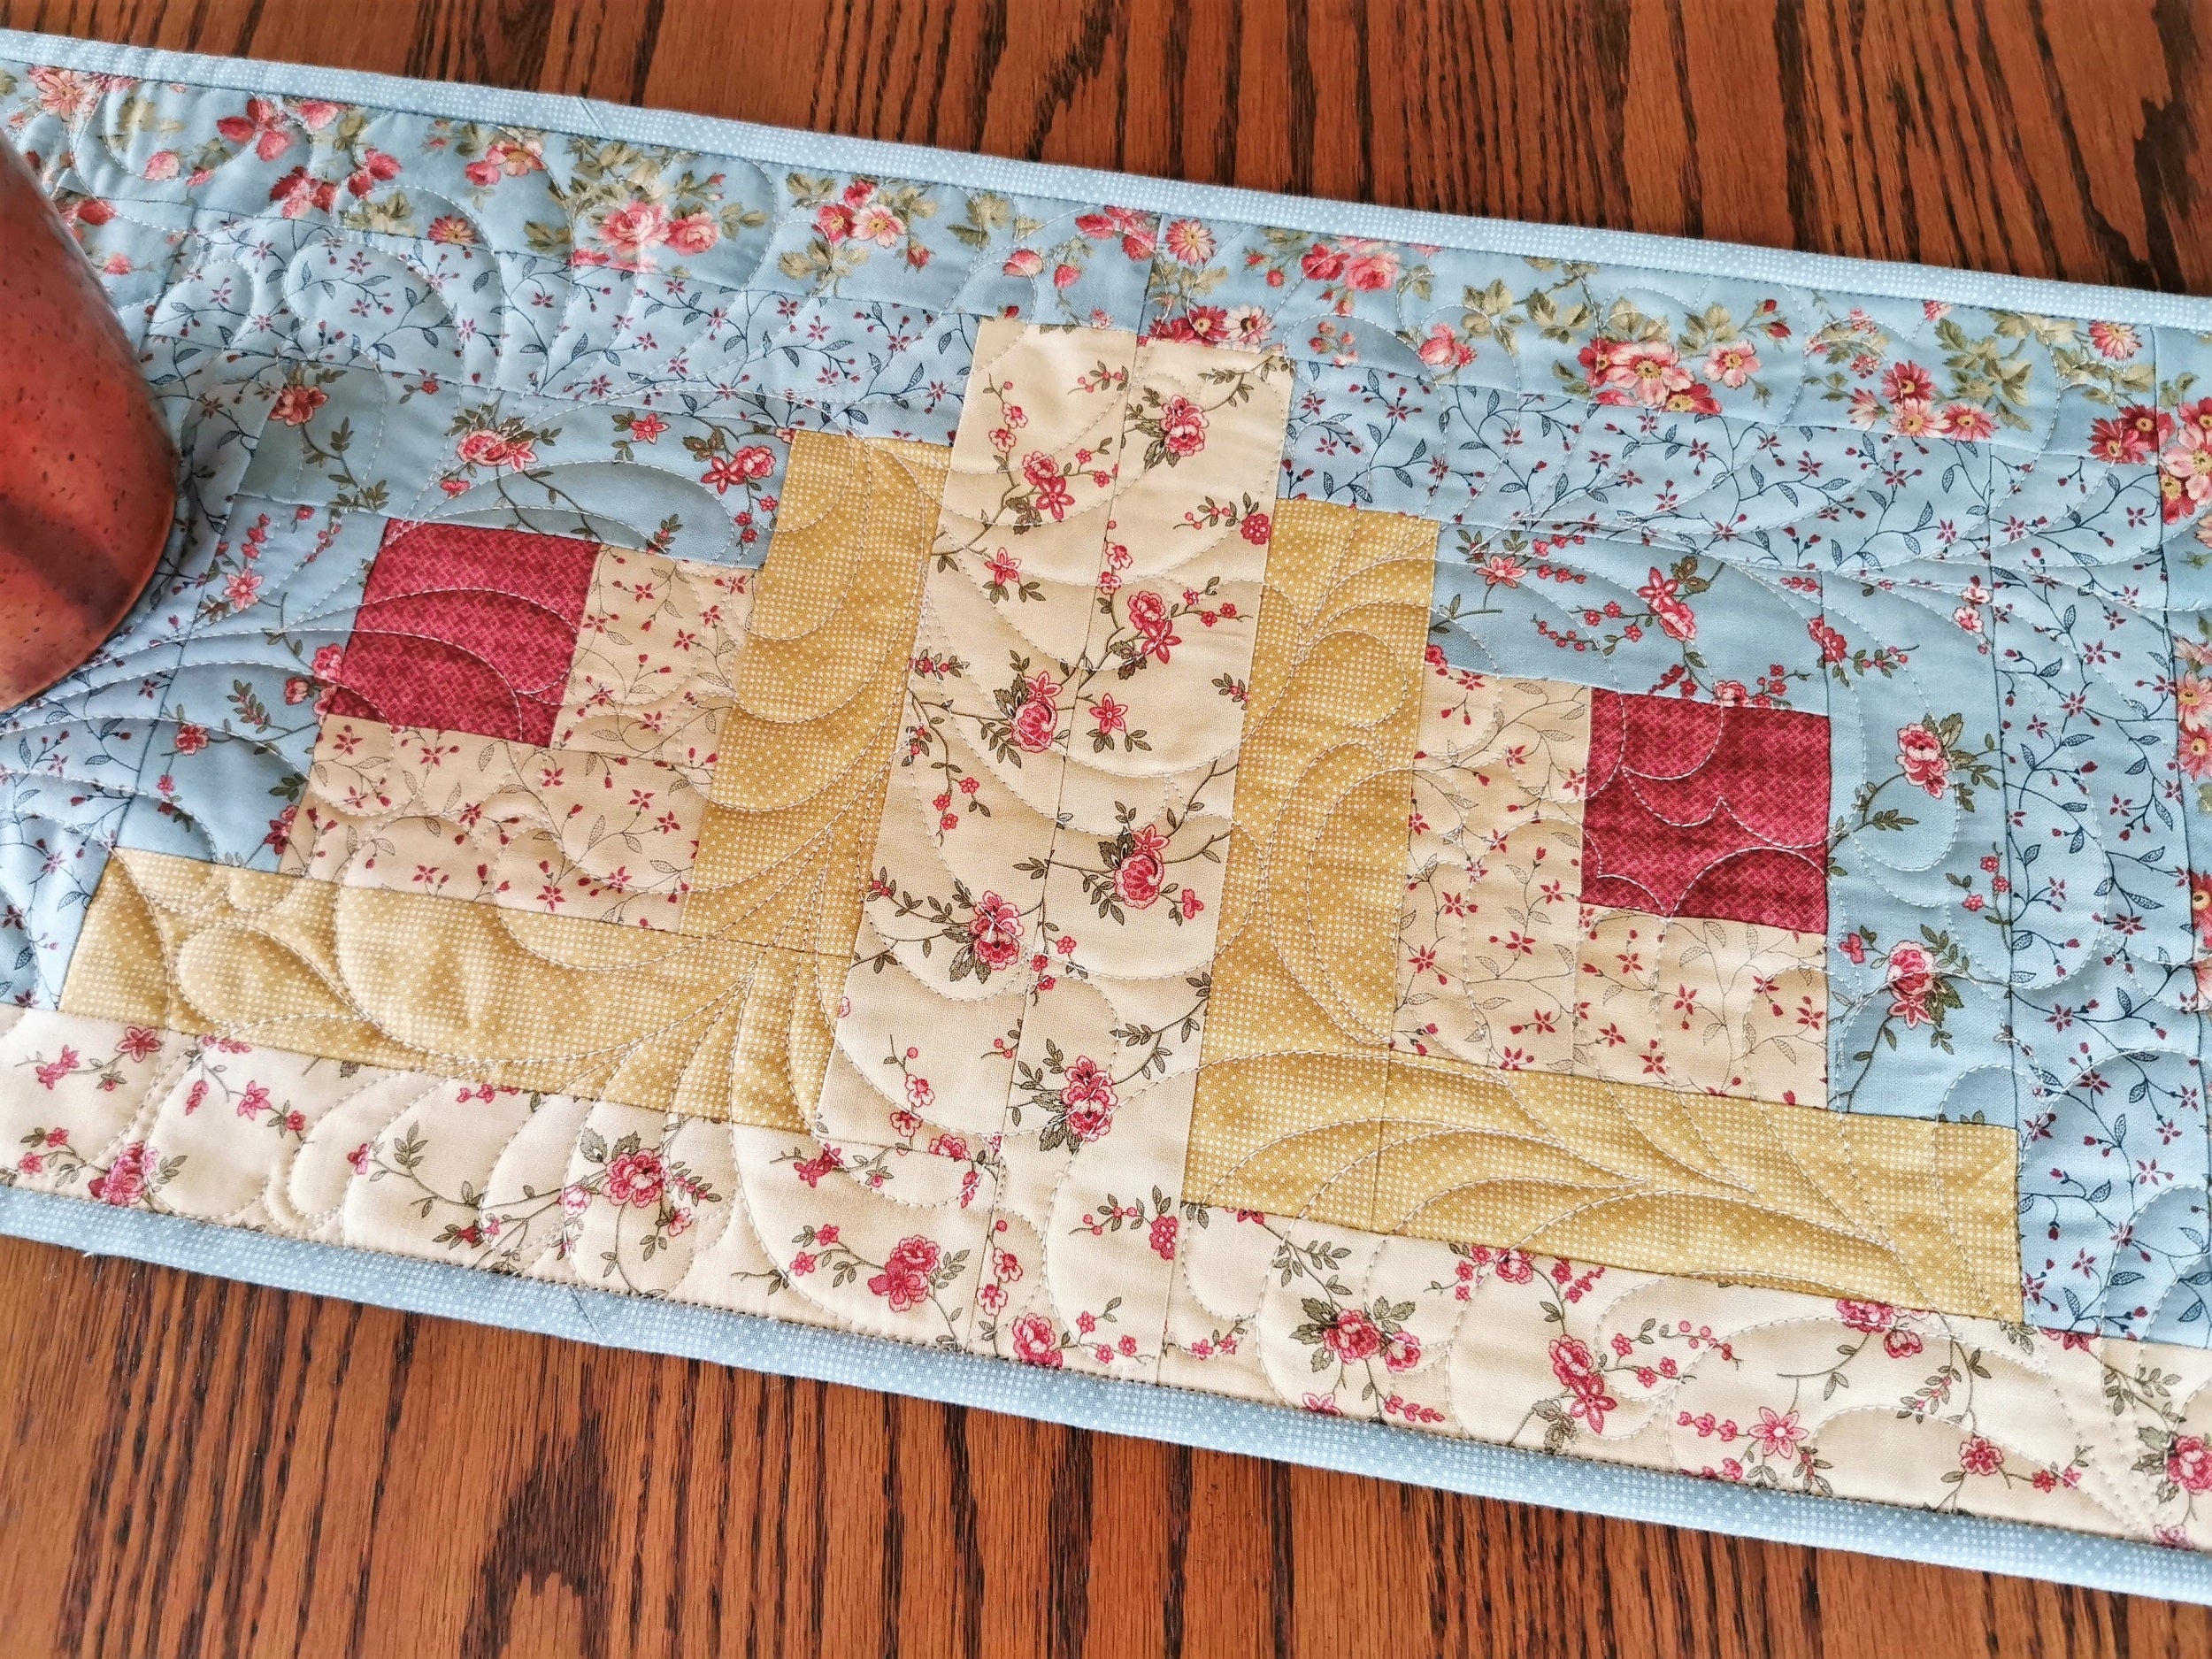 Log Cabin Quilted Table Runner in Teal and Yellow